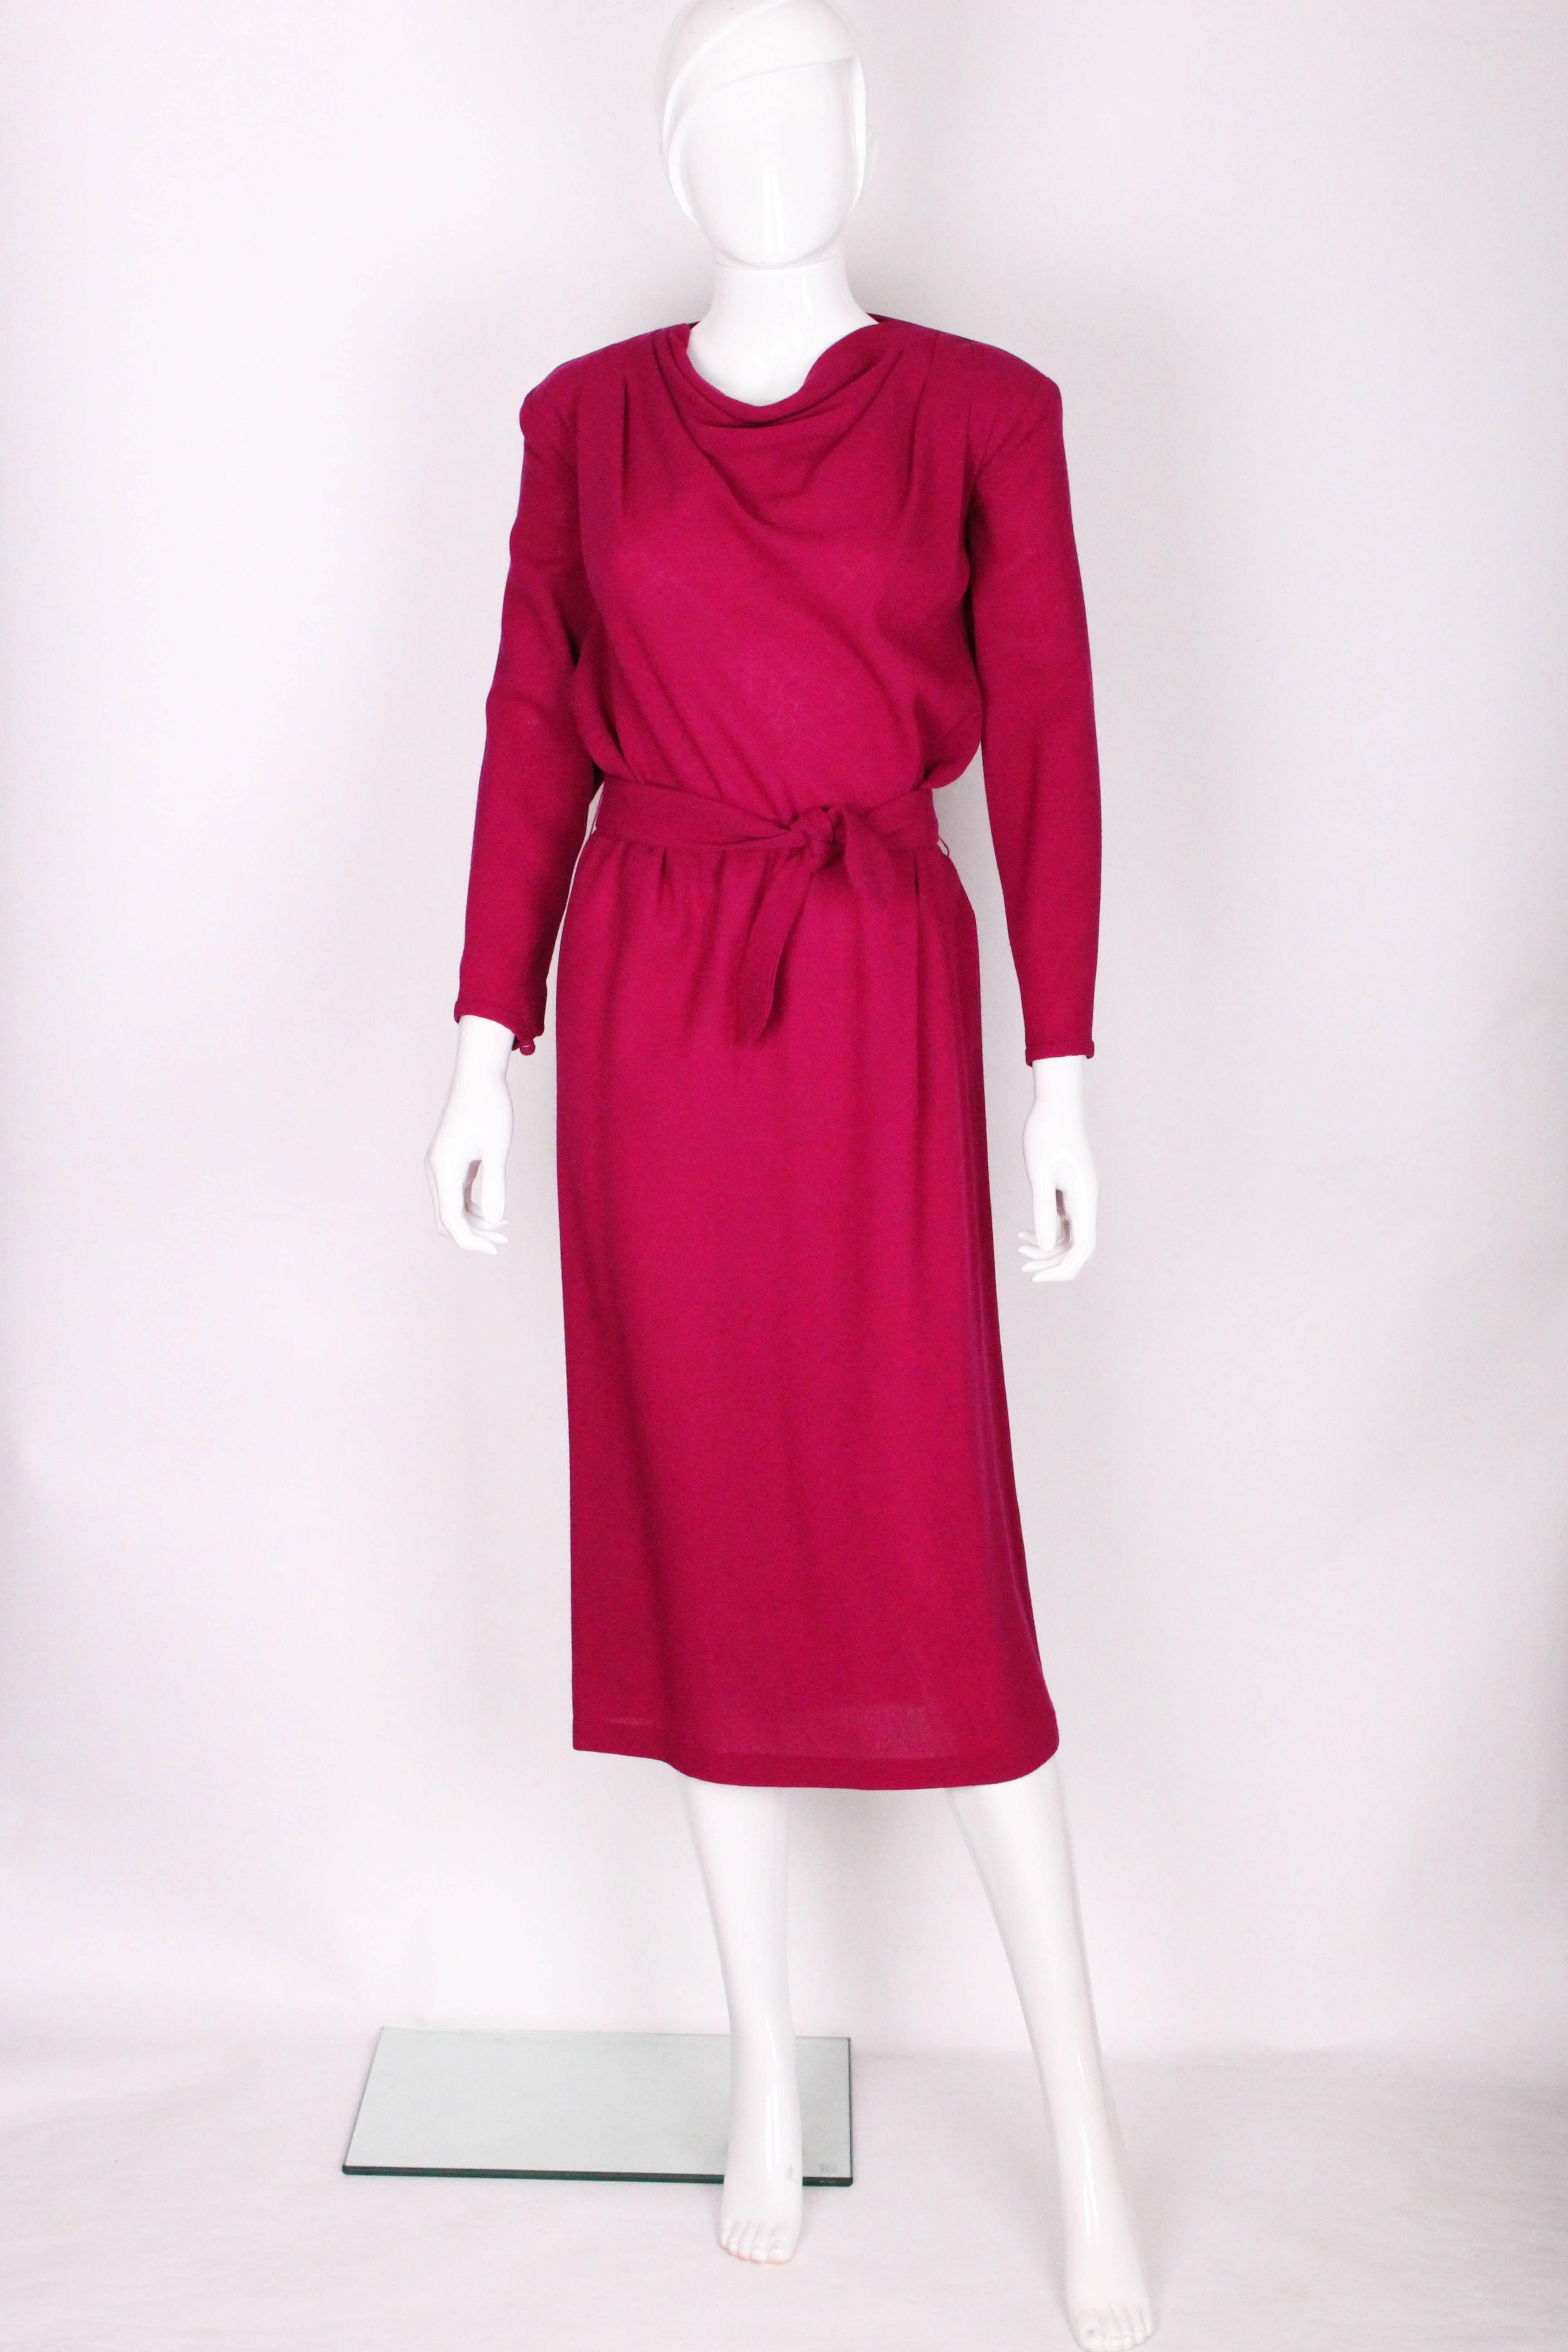 A great dress by British design house Biba. In an eye catching shade of purple/pink and in an easy to wear wool crepe - this dress can take you from work to play. It has a slight cowl neck with pleating on each shoulder, elbow length sleeves with a